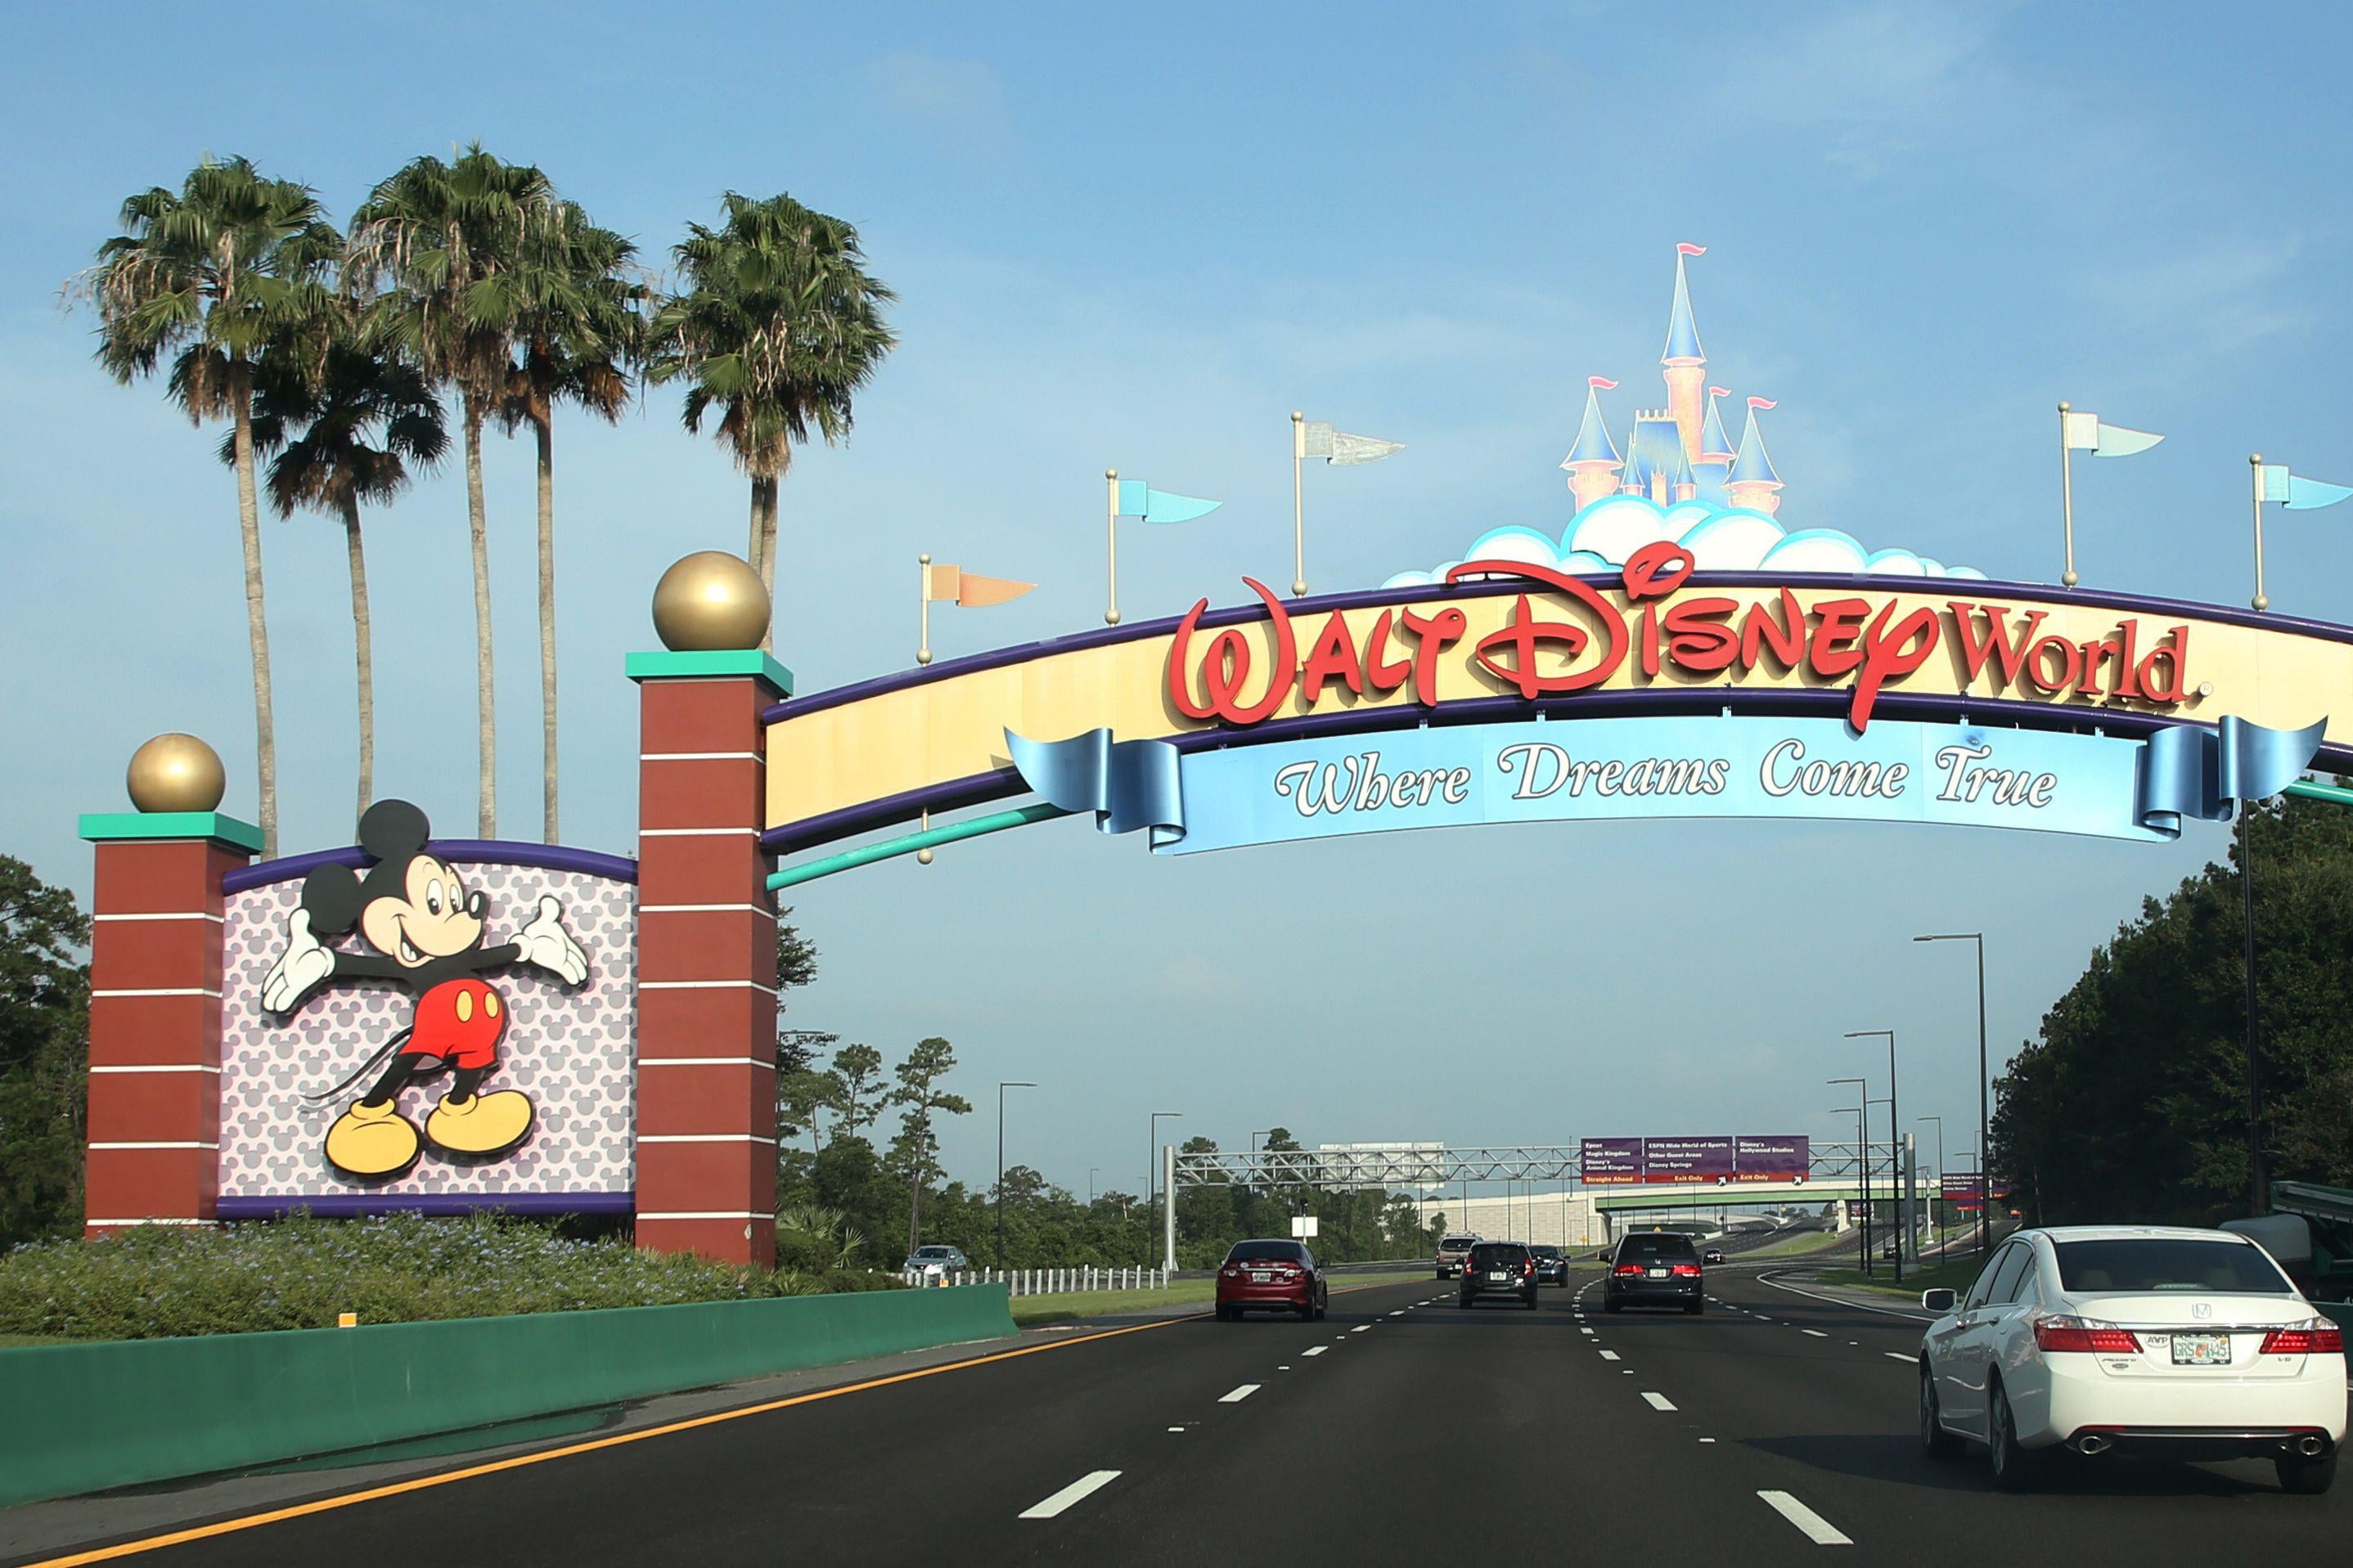 A sign that says "Walt Disney World: Where Dreams Come True" above a four-lane highway with palm trees and a clear blue sky in the background